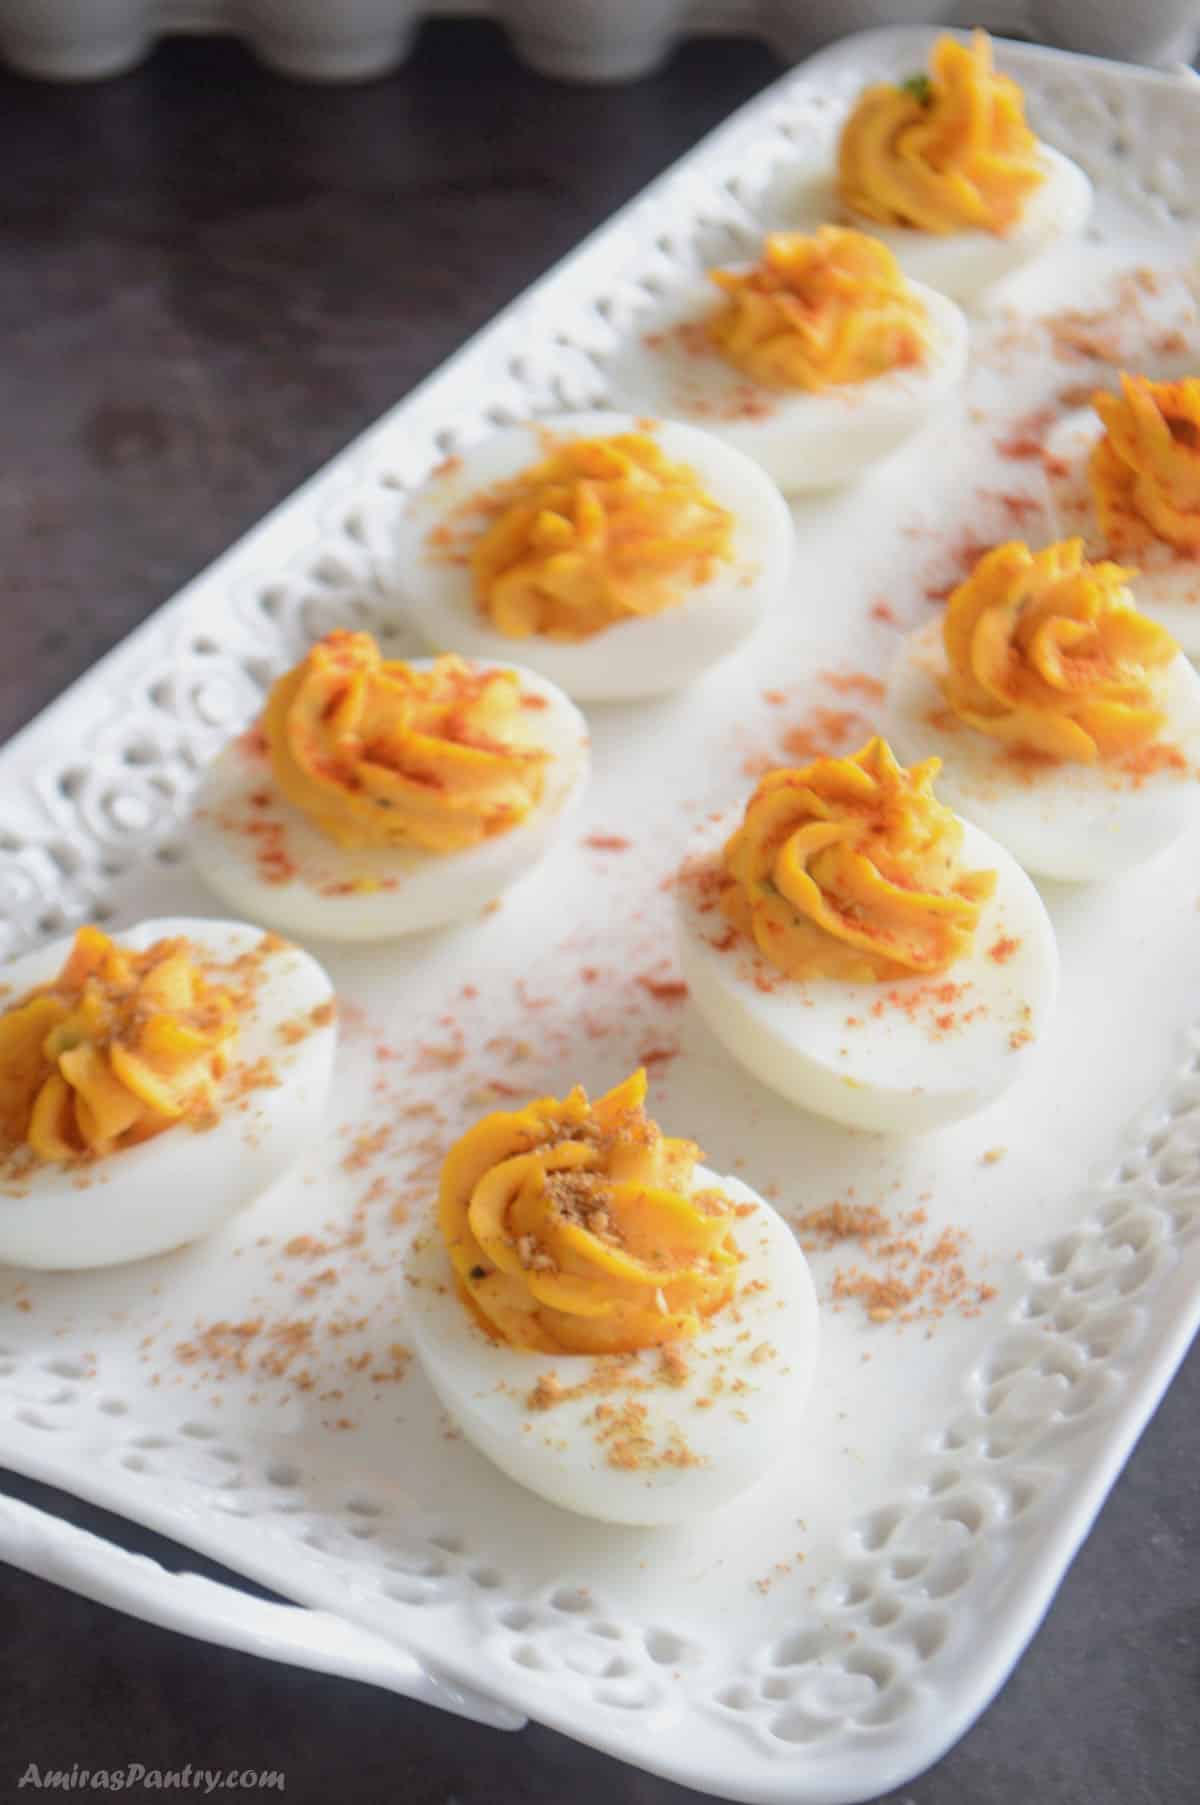 Deviled eggs placed on a white serving plate.